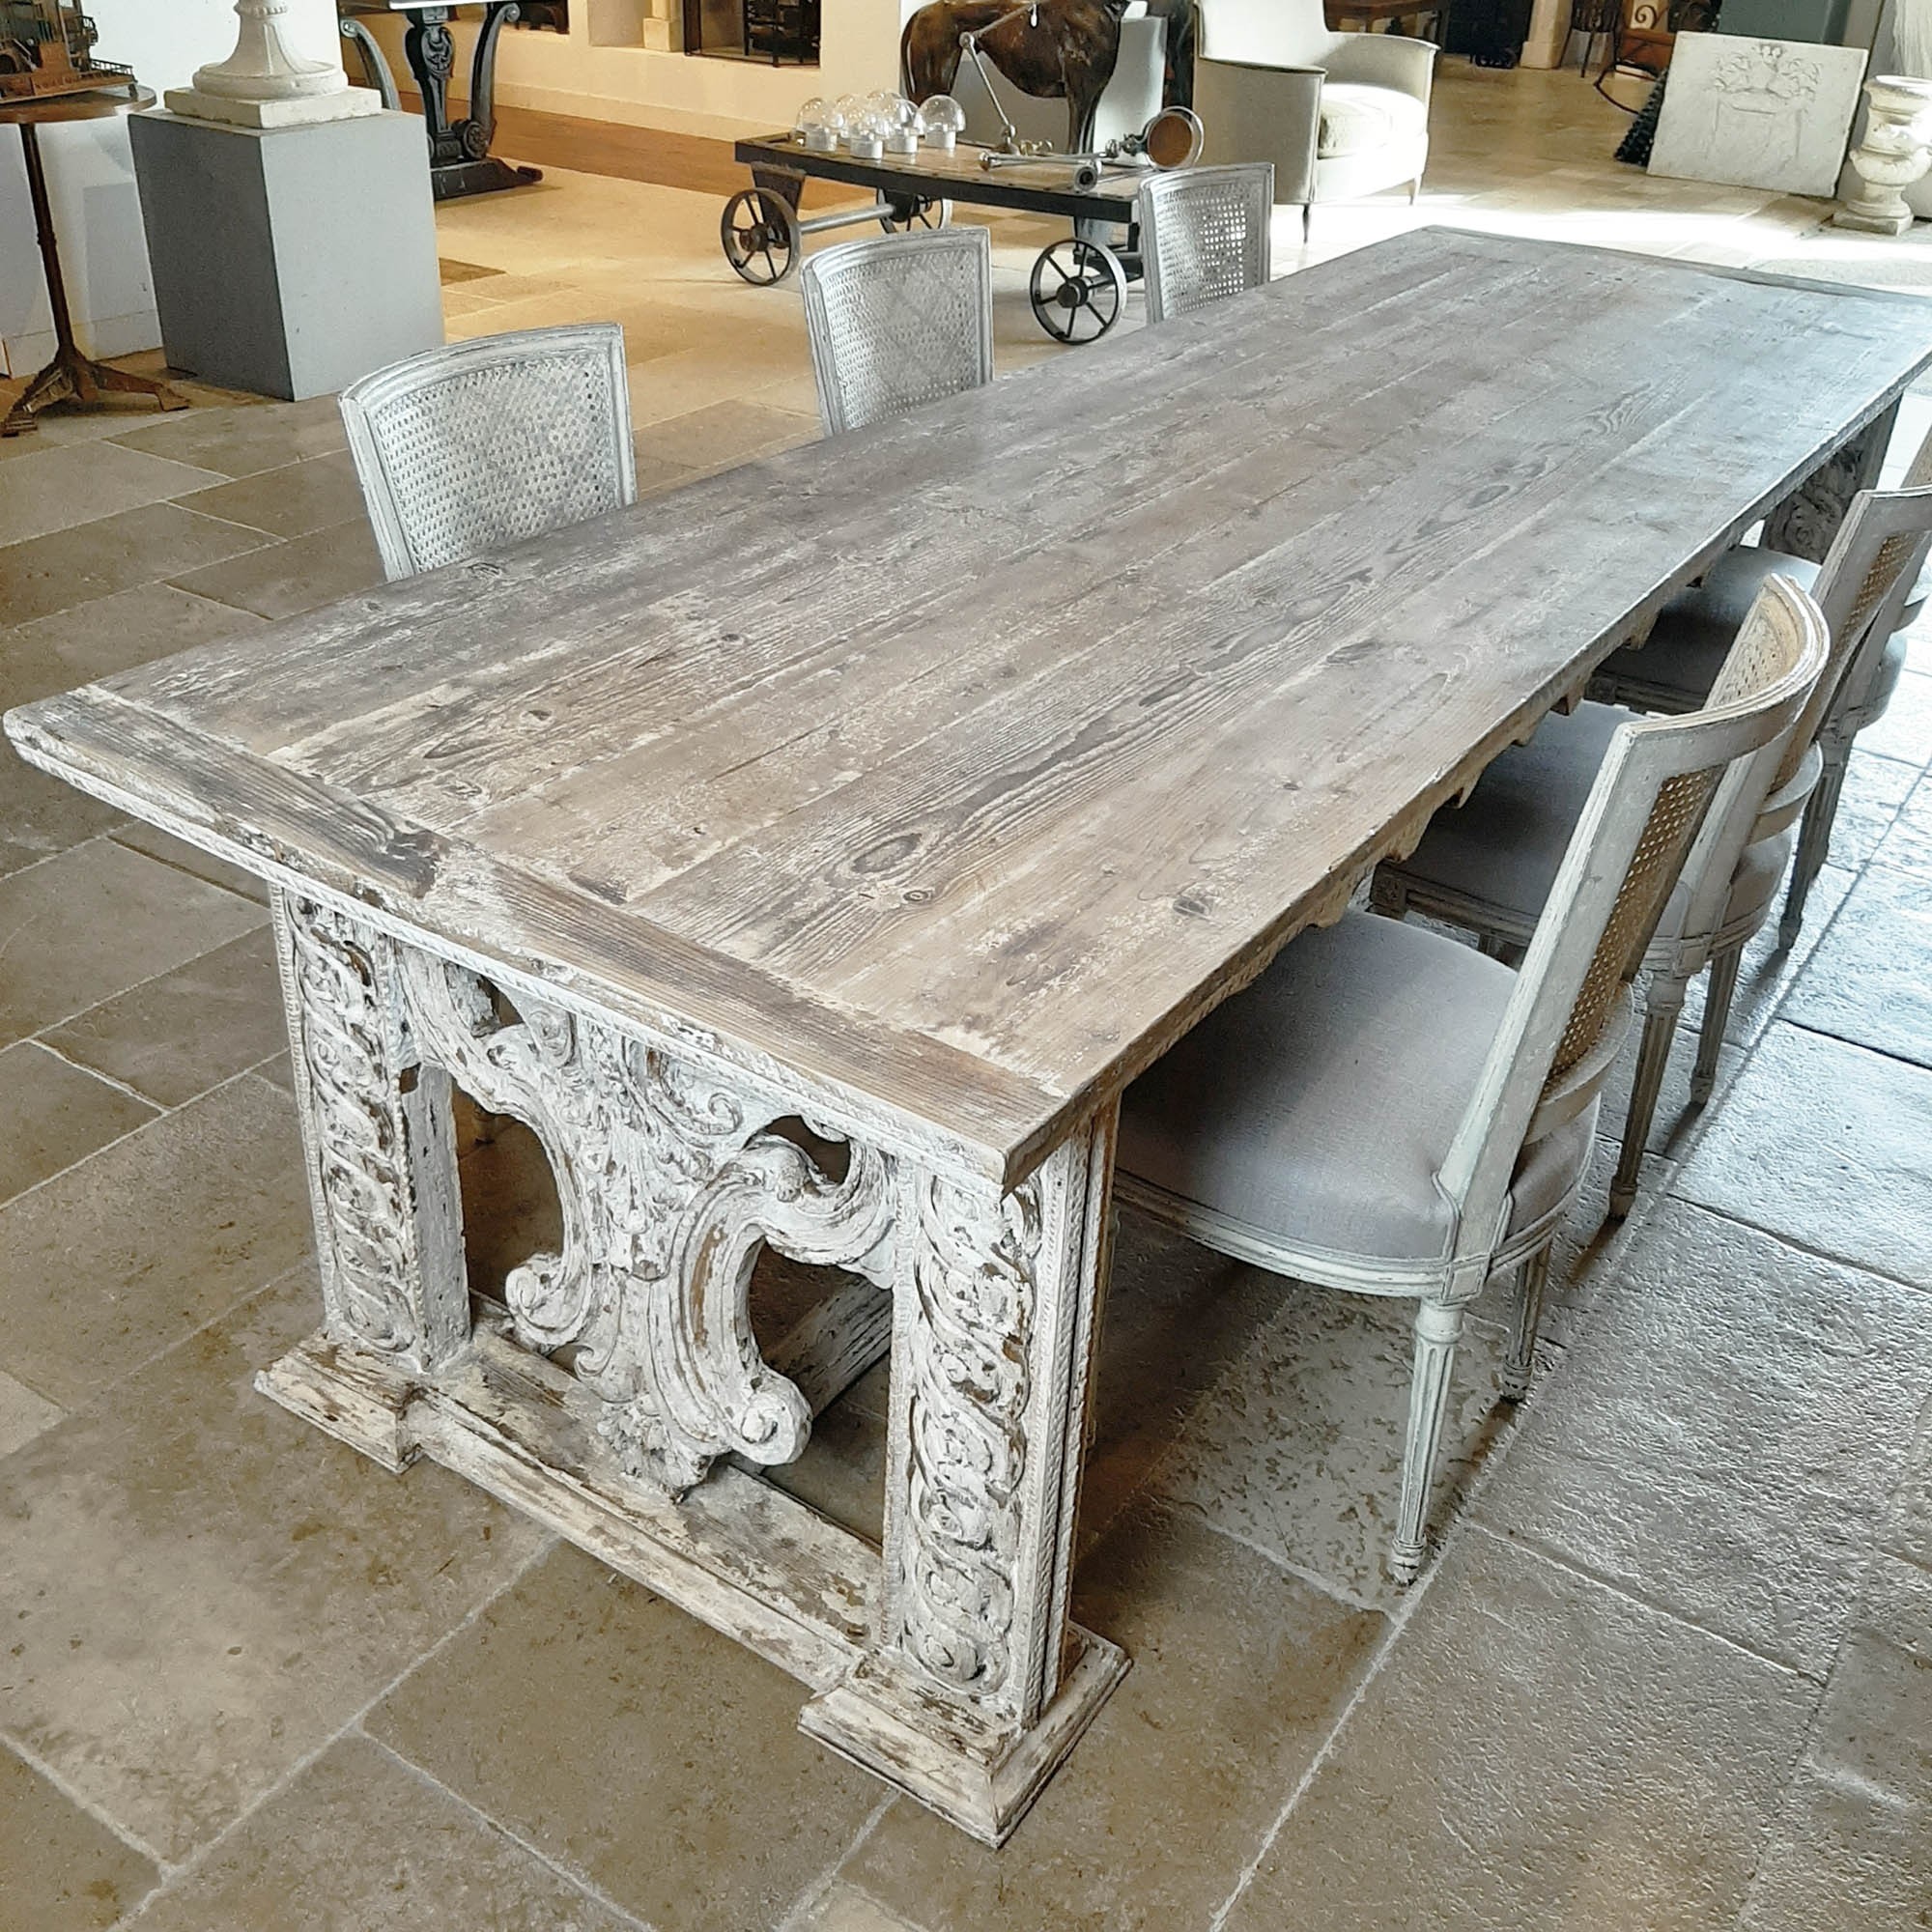 https://www.pietjonker.com/wp-content/uploads/sites/2/2020/03/large-dining-table-made-of-antique-wood_1_.jpg